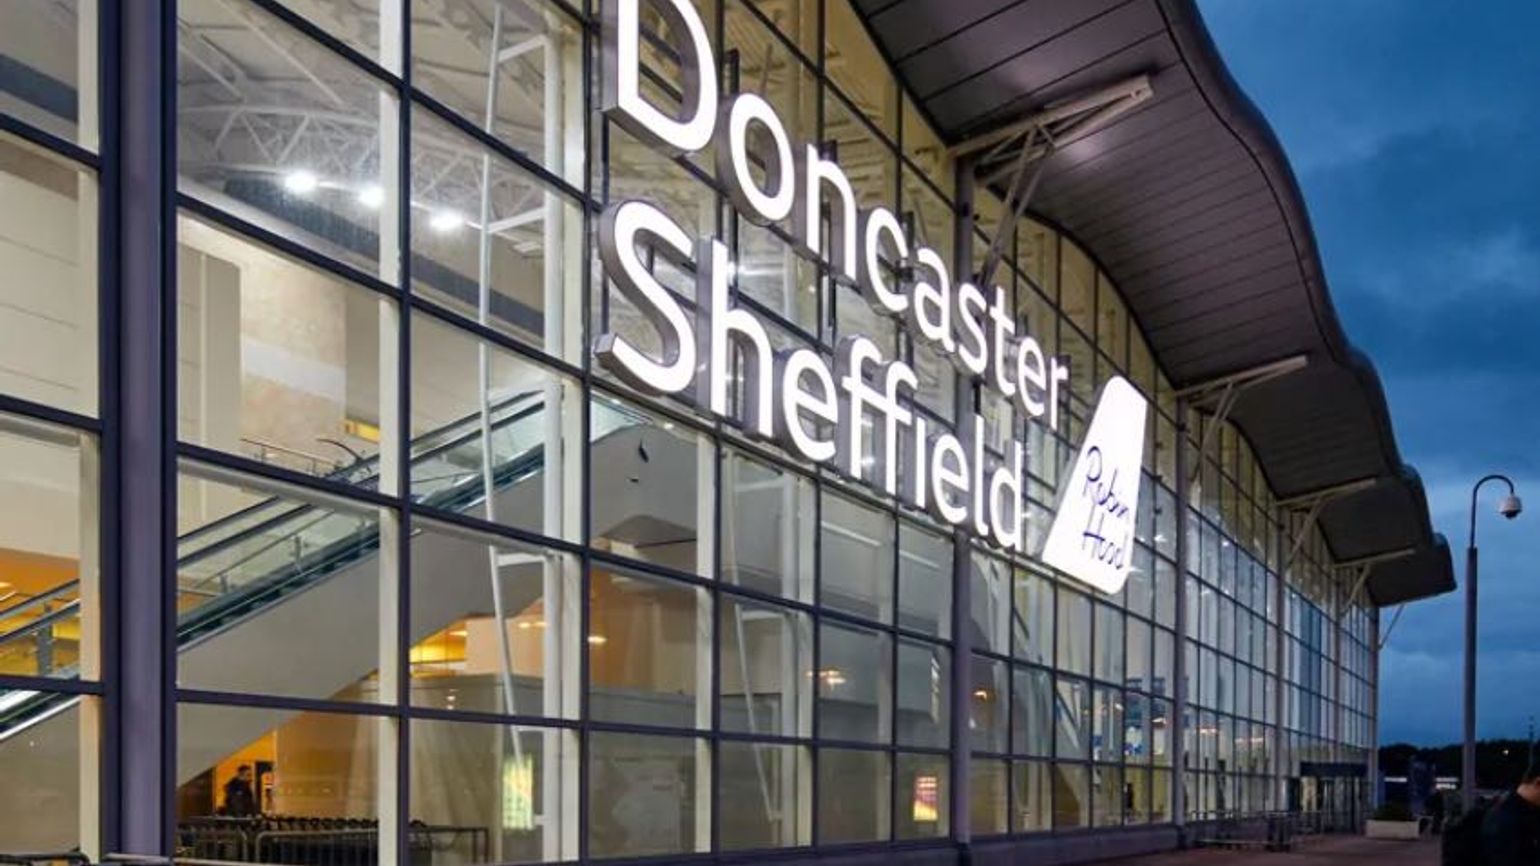 Doncaster Sheffield airport to look at ‘all options’ on future